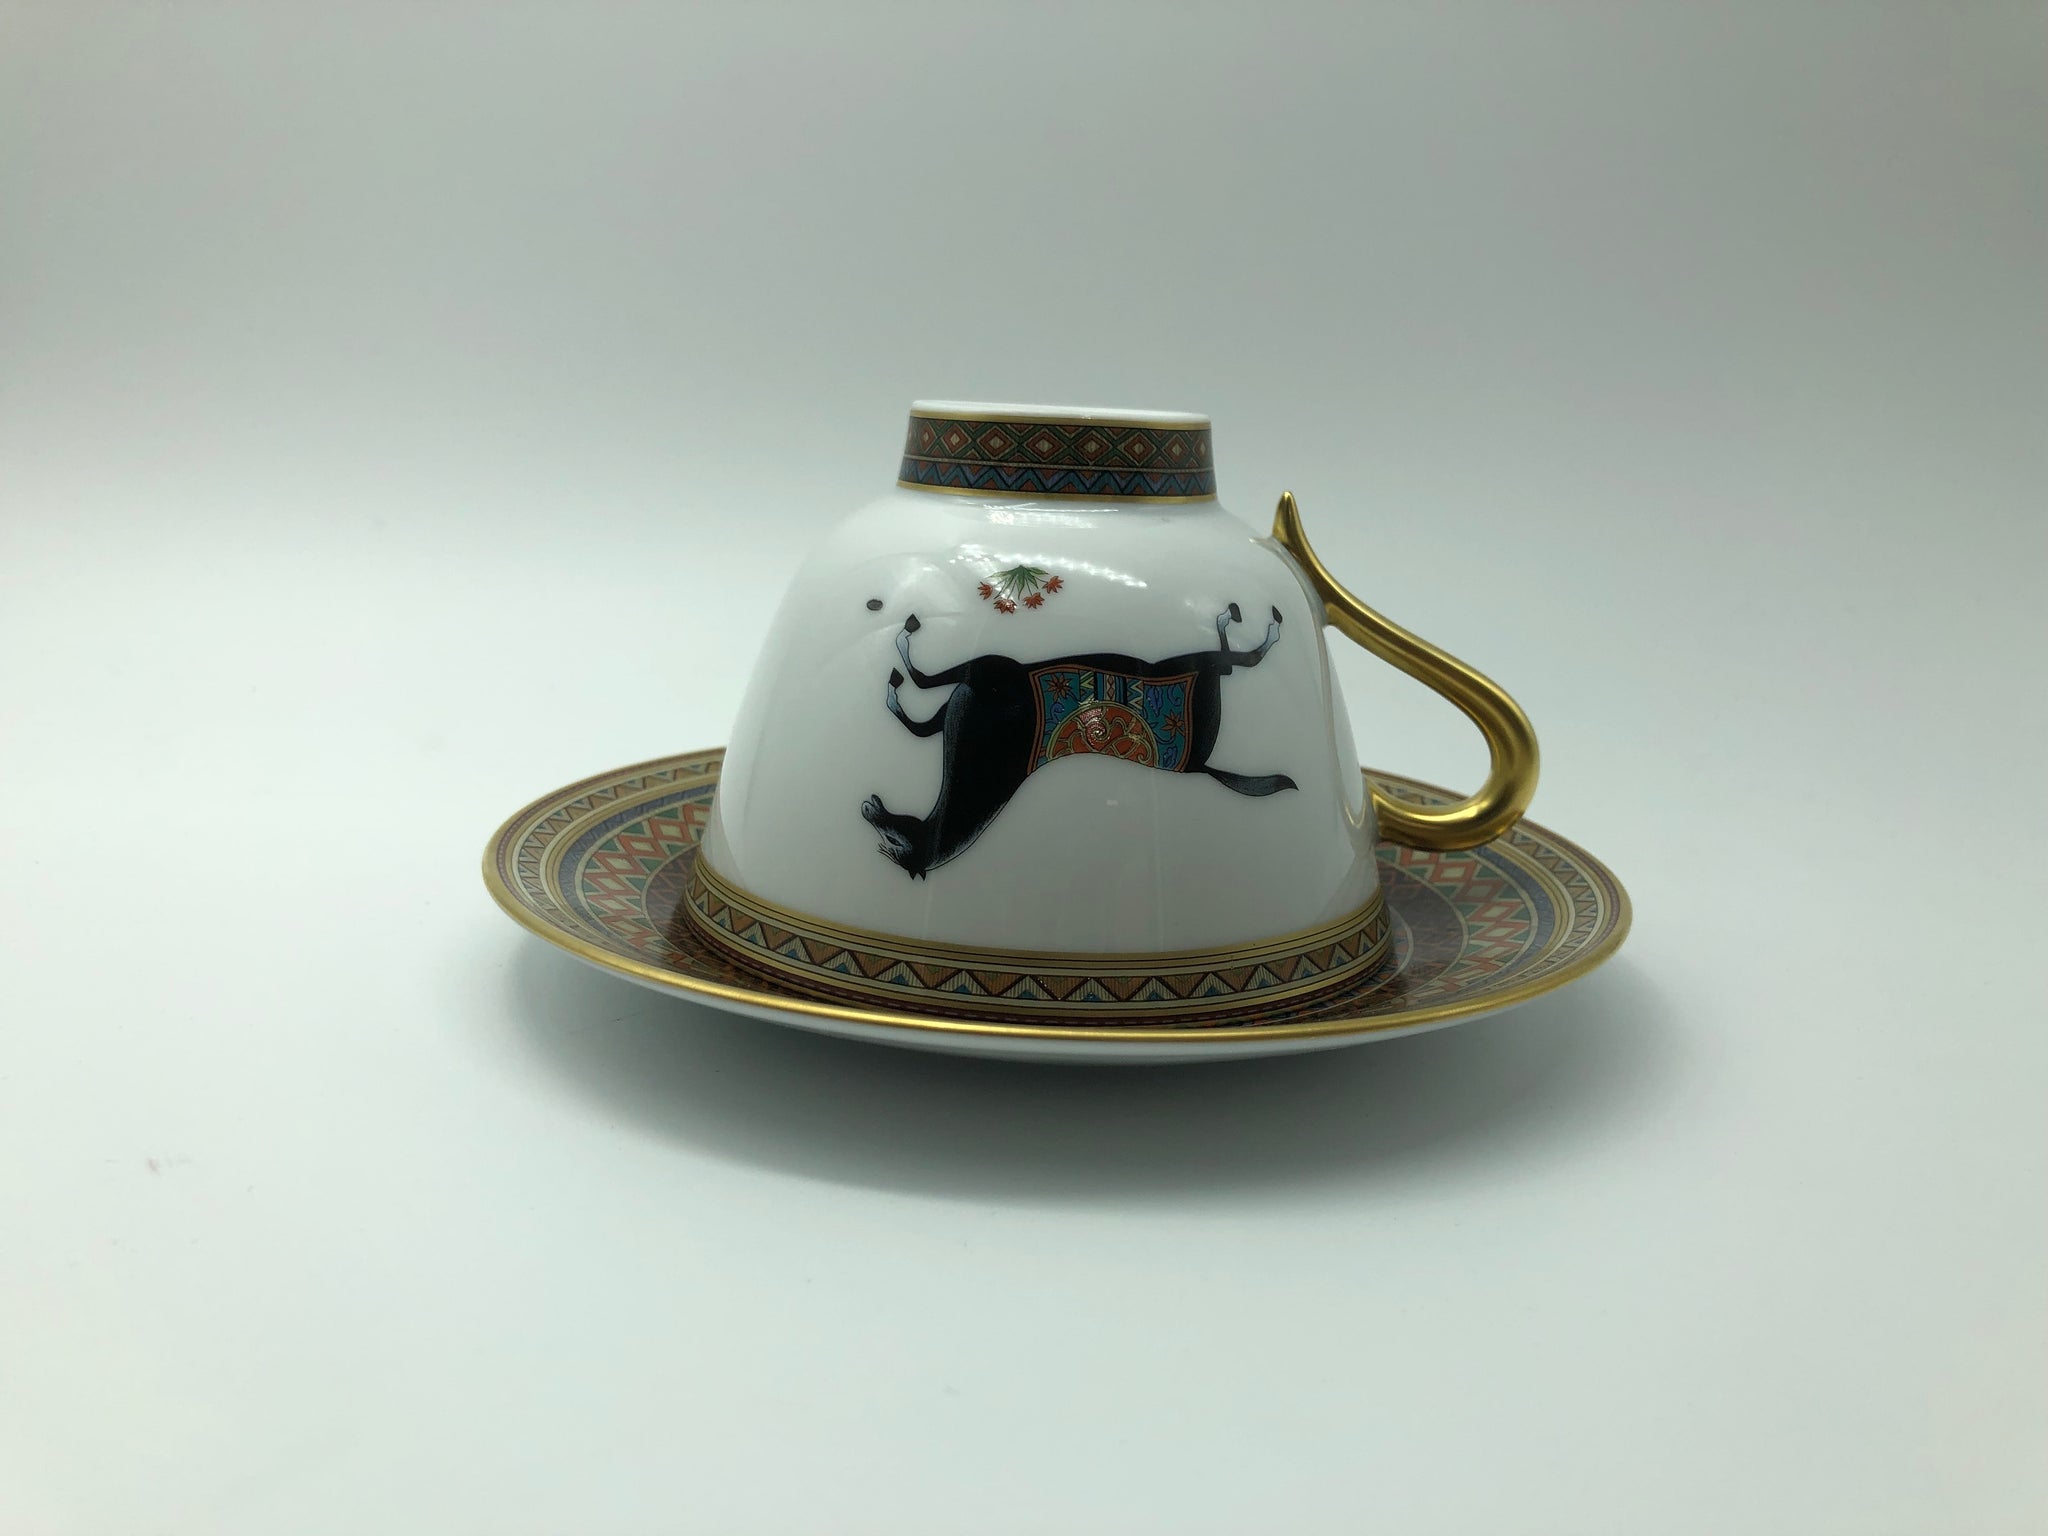 Hermes Cheval D'Orient Teacup and Saucer No 2  BRAND NEW